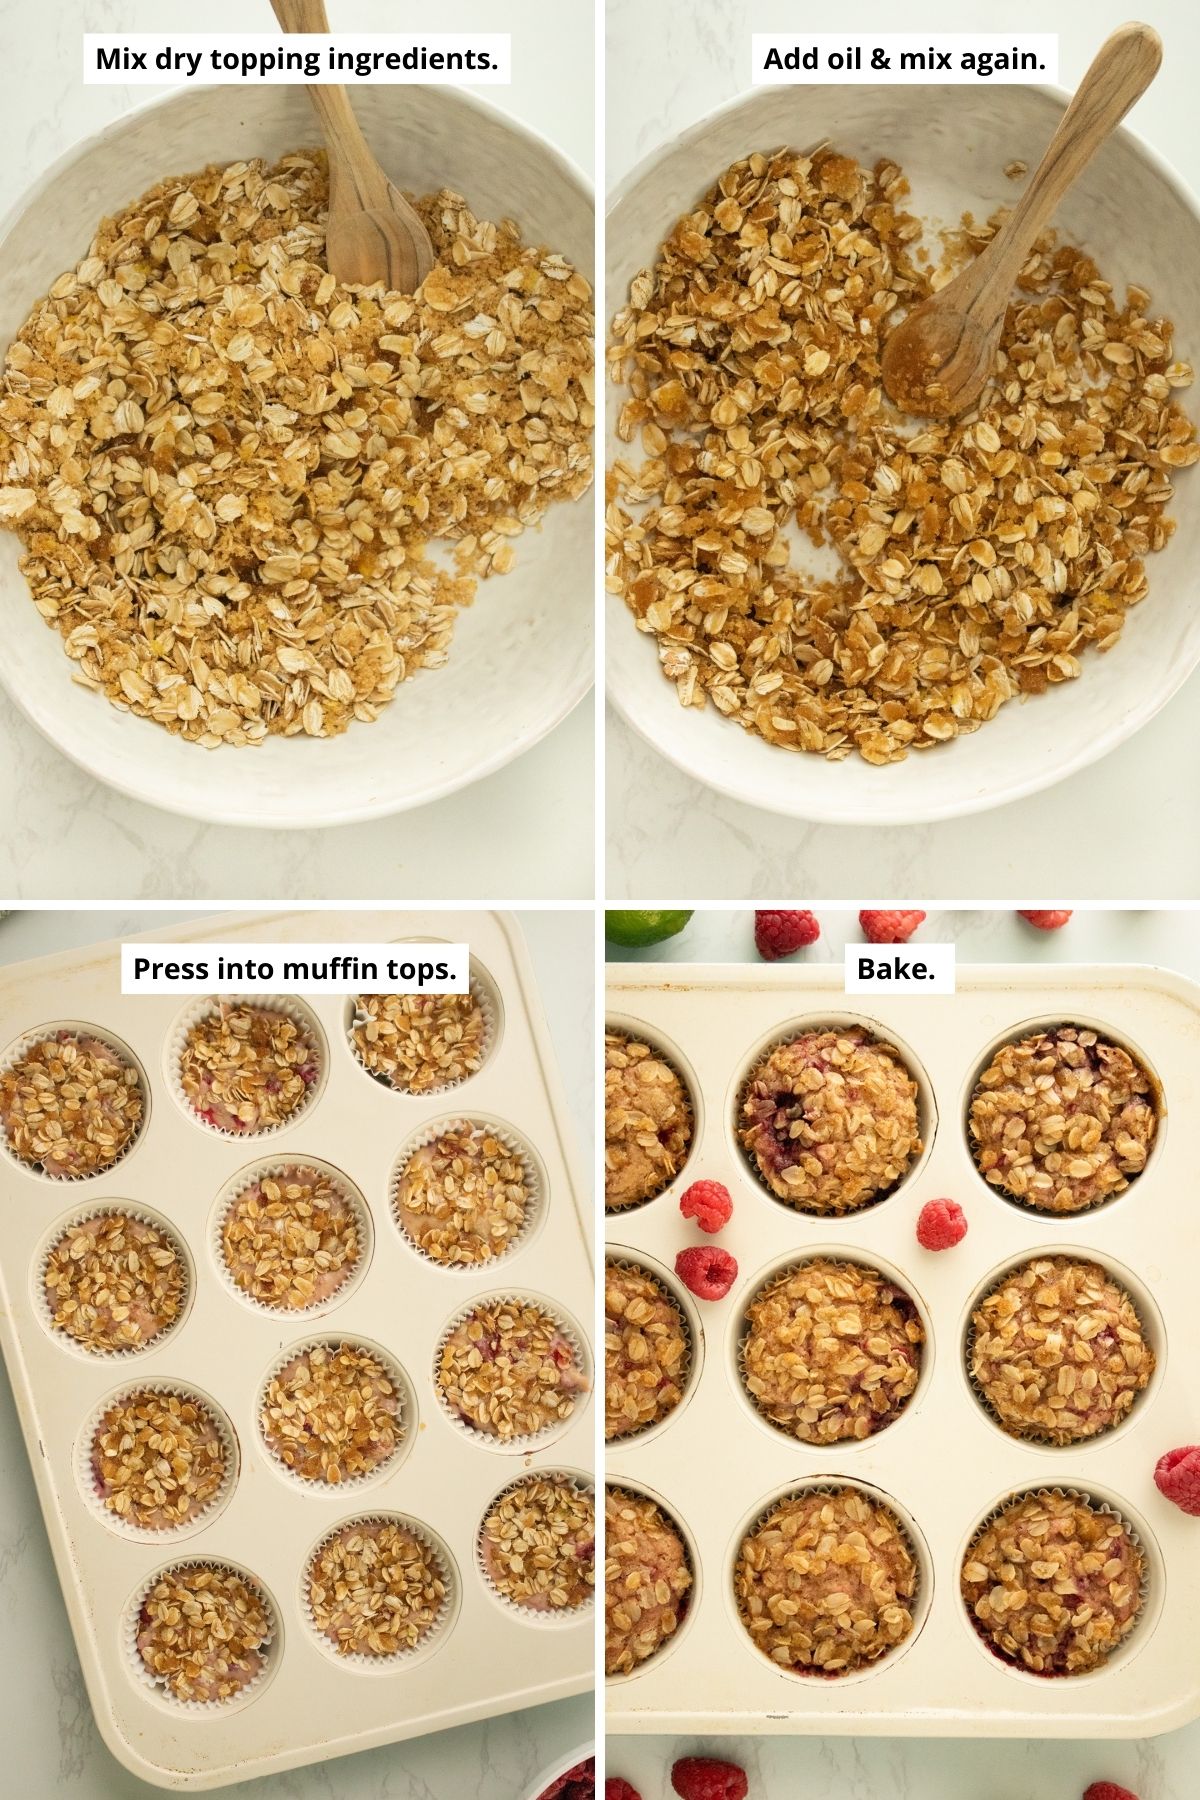 image collage showing oat crumble ingredients mixed before and after adding oil, and the crumble on top of the muffins before and after baking